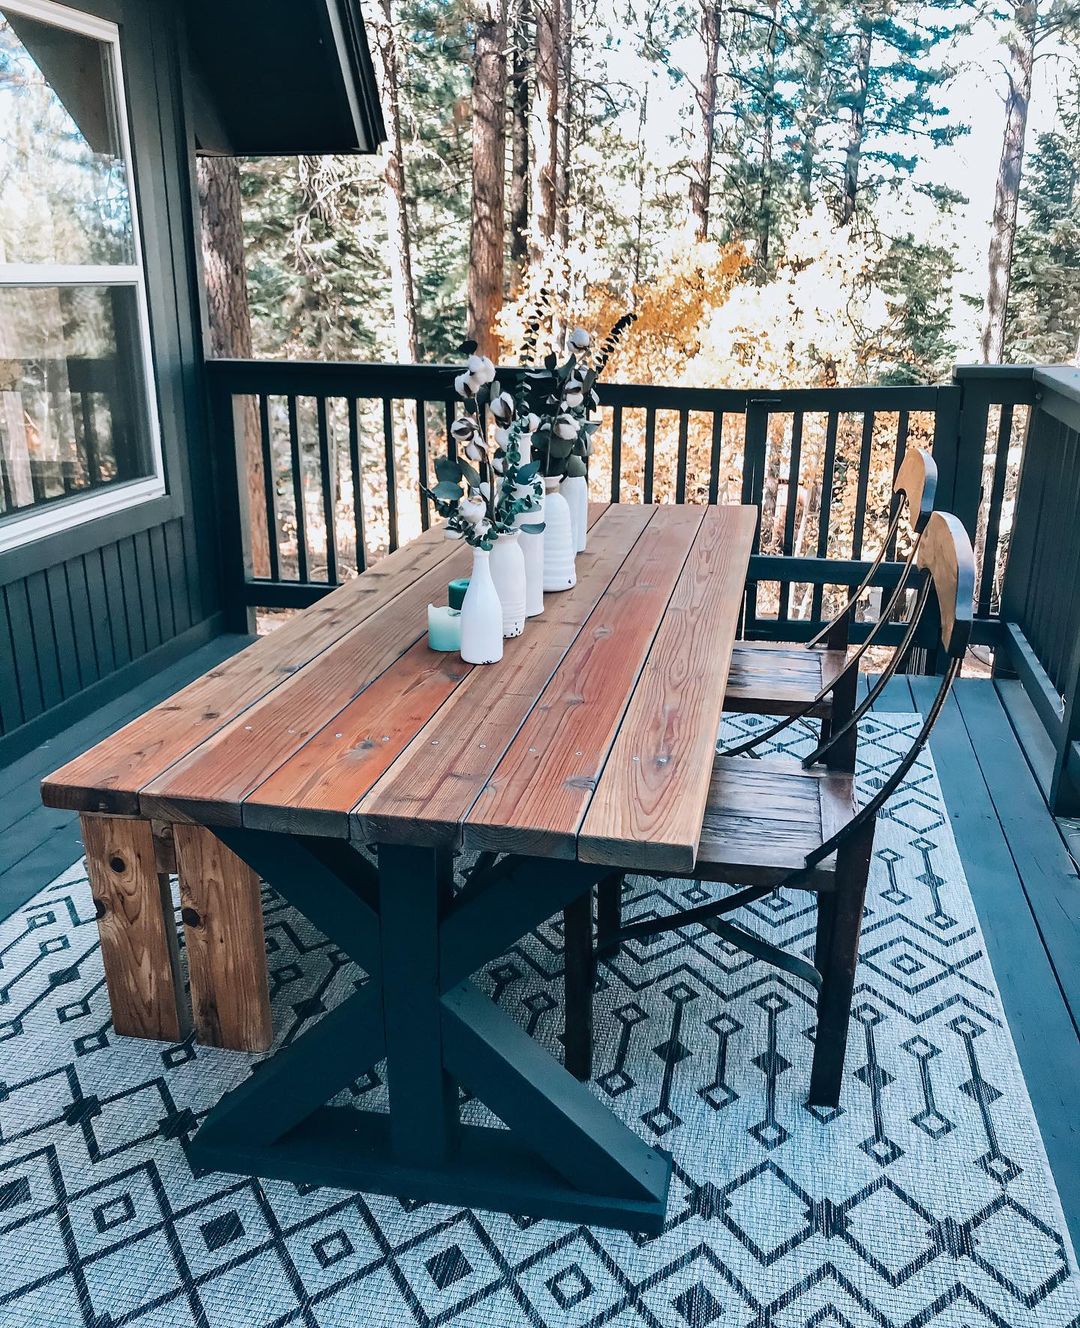 Handmade Wooden Outdoor Dining Table. Photo by Instagram user @shoppingwith.hannah